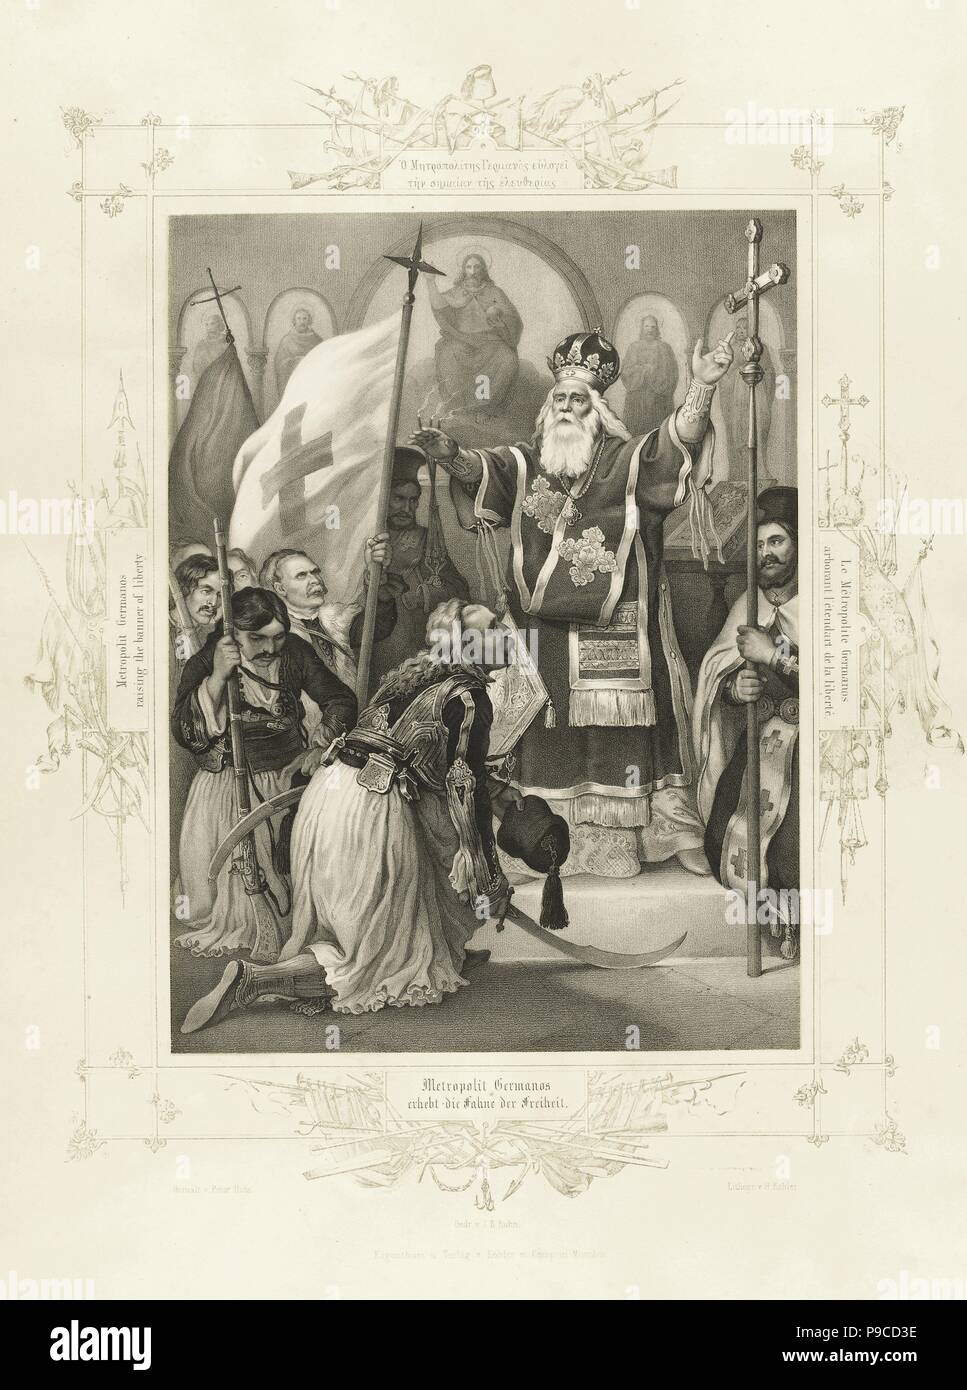 The Metropolitan Germanos raising the banner of freedom (From the Album of Greek Heroism). Museum: PRIVATE COLLECTION. Stock Photo